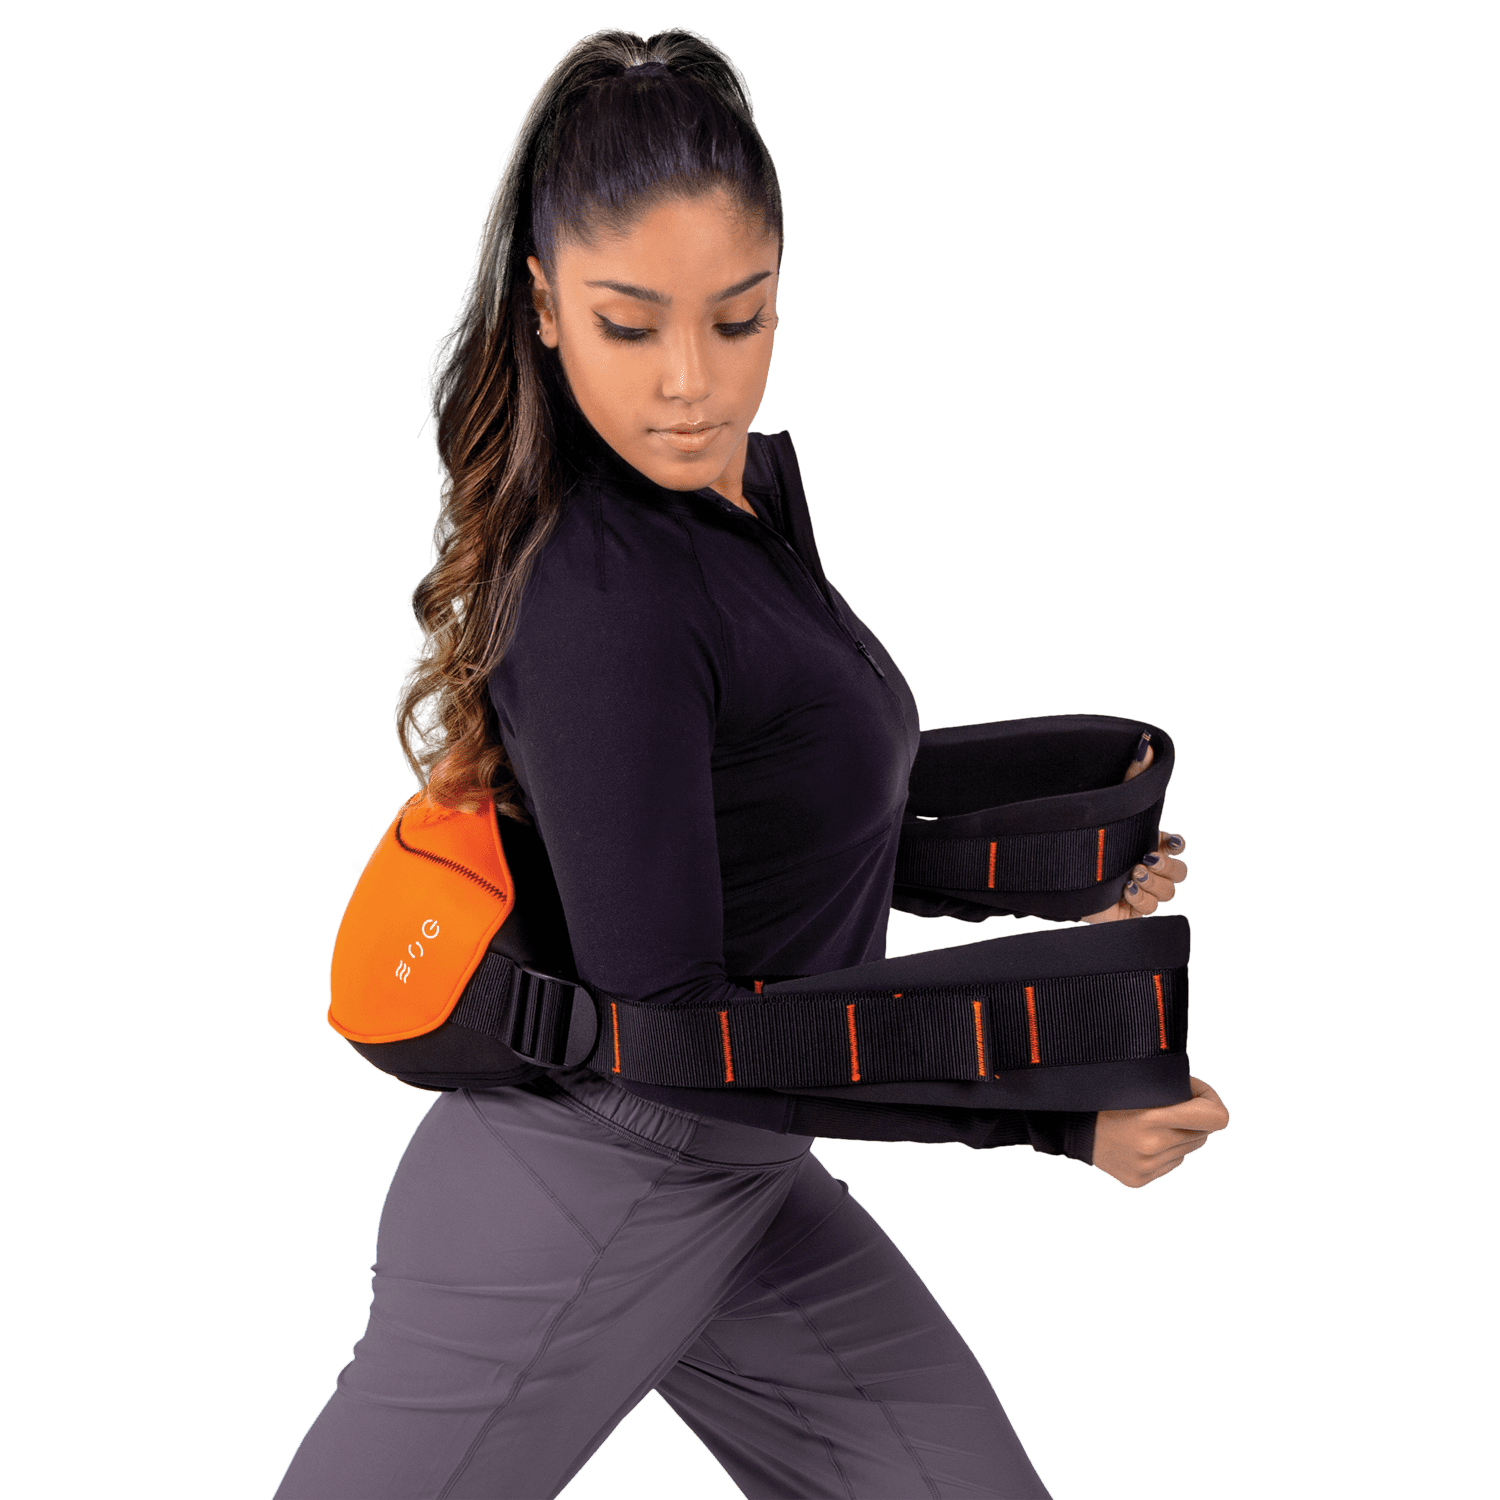 Shiatsu Neck, Back and Shoulder Massager with Heat by truMedic, Deep  Kneading 3D Massage for Muscle Pain Relief, Featured on Oprah's Favorite  Things in Green, MagicHands 